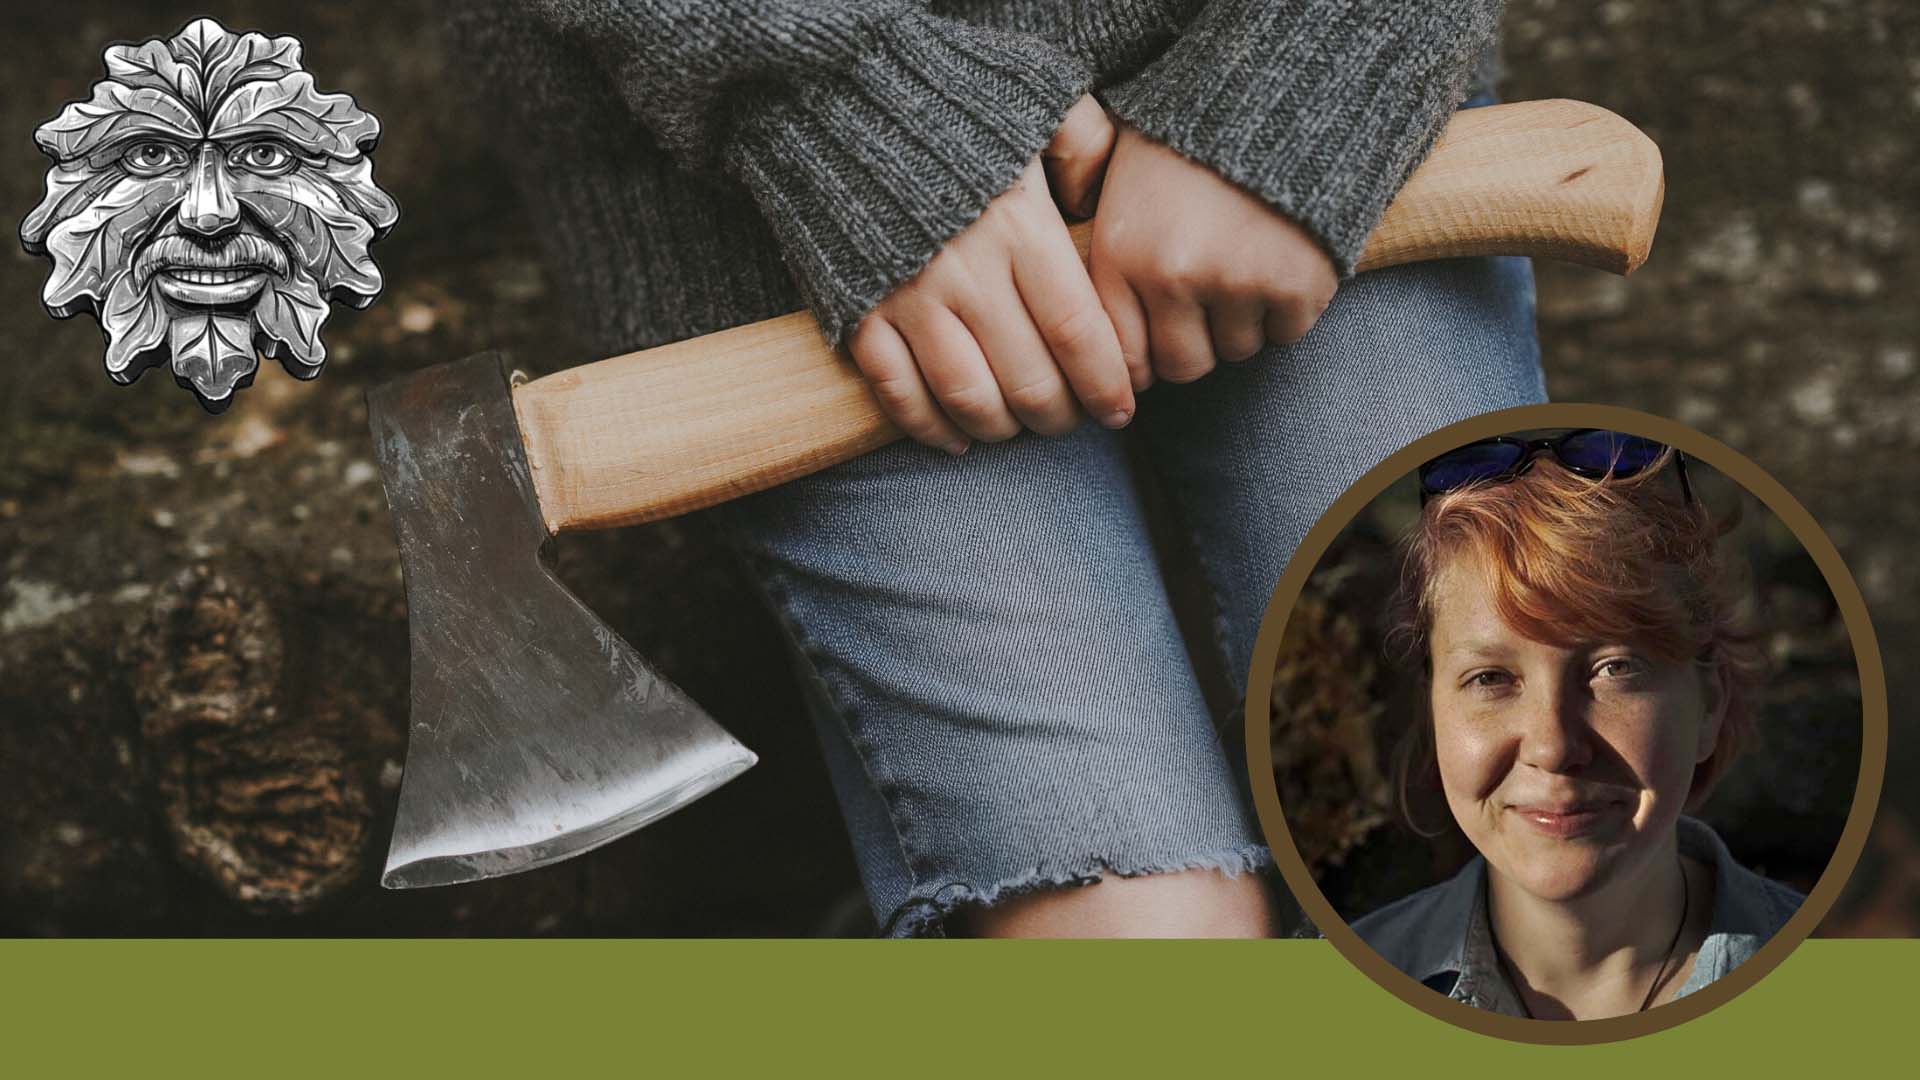 Hatchet Safety with Emilie Rigby